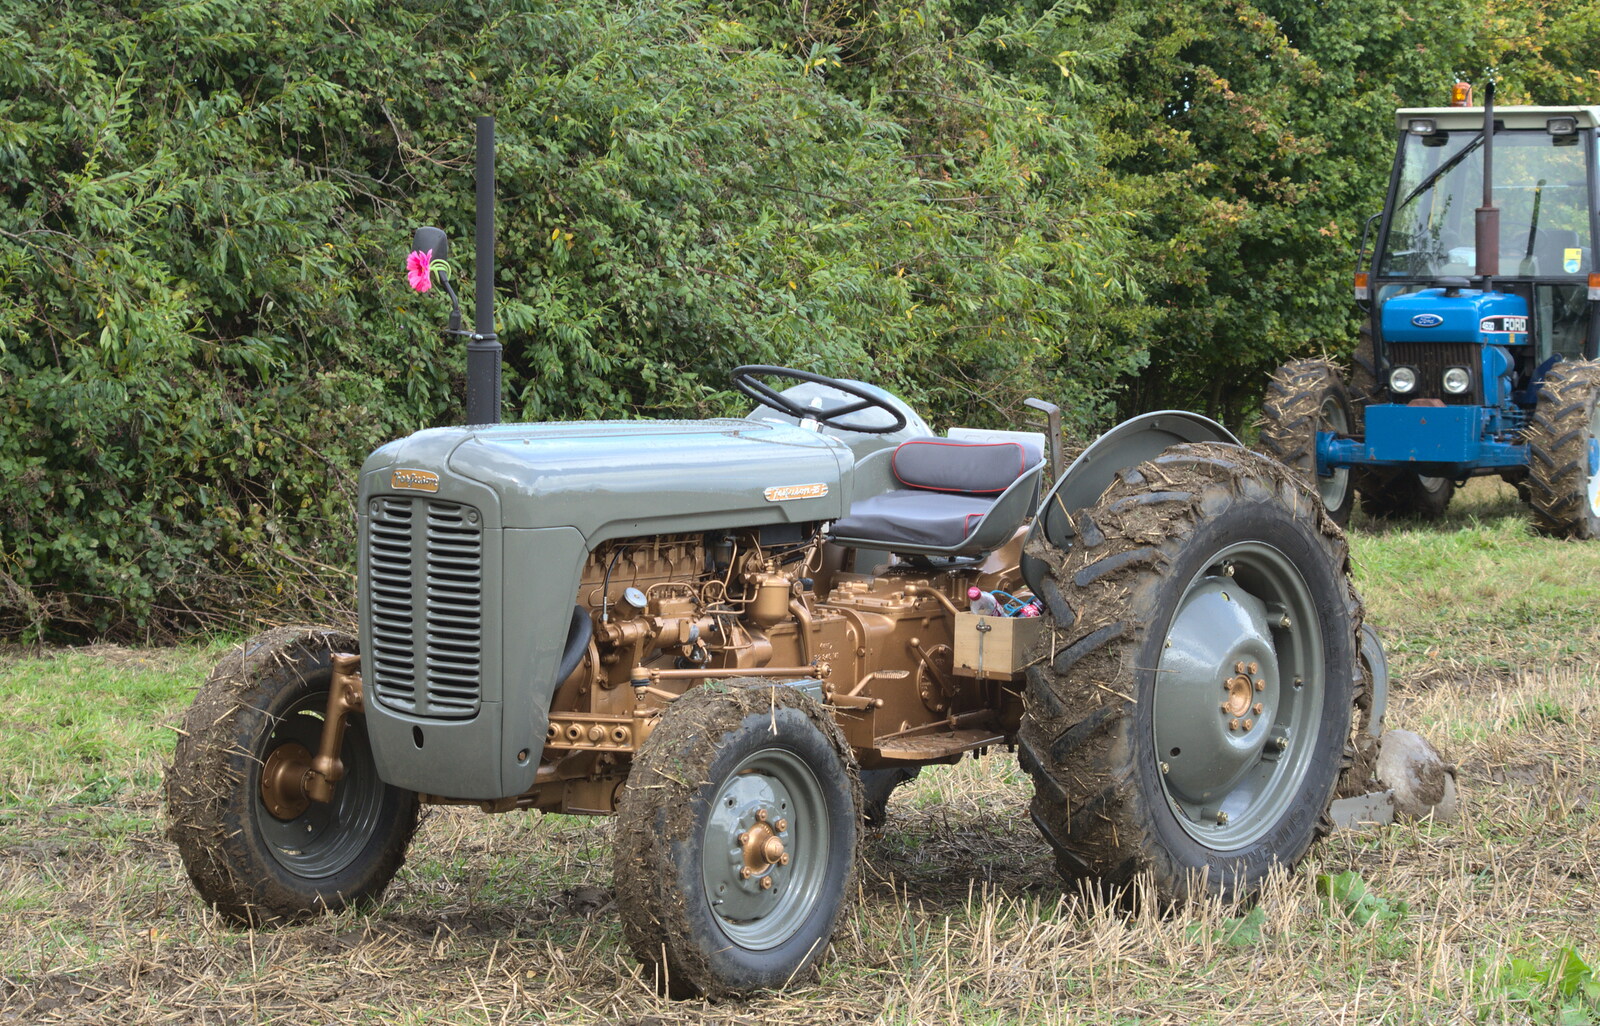 The Fergie 35 Special Edition from Ploughing and Pizza, Thrandeston and Bury St. Edmunds, Suffolk - 17th September 2017